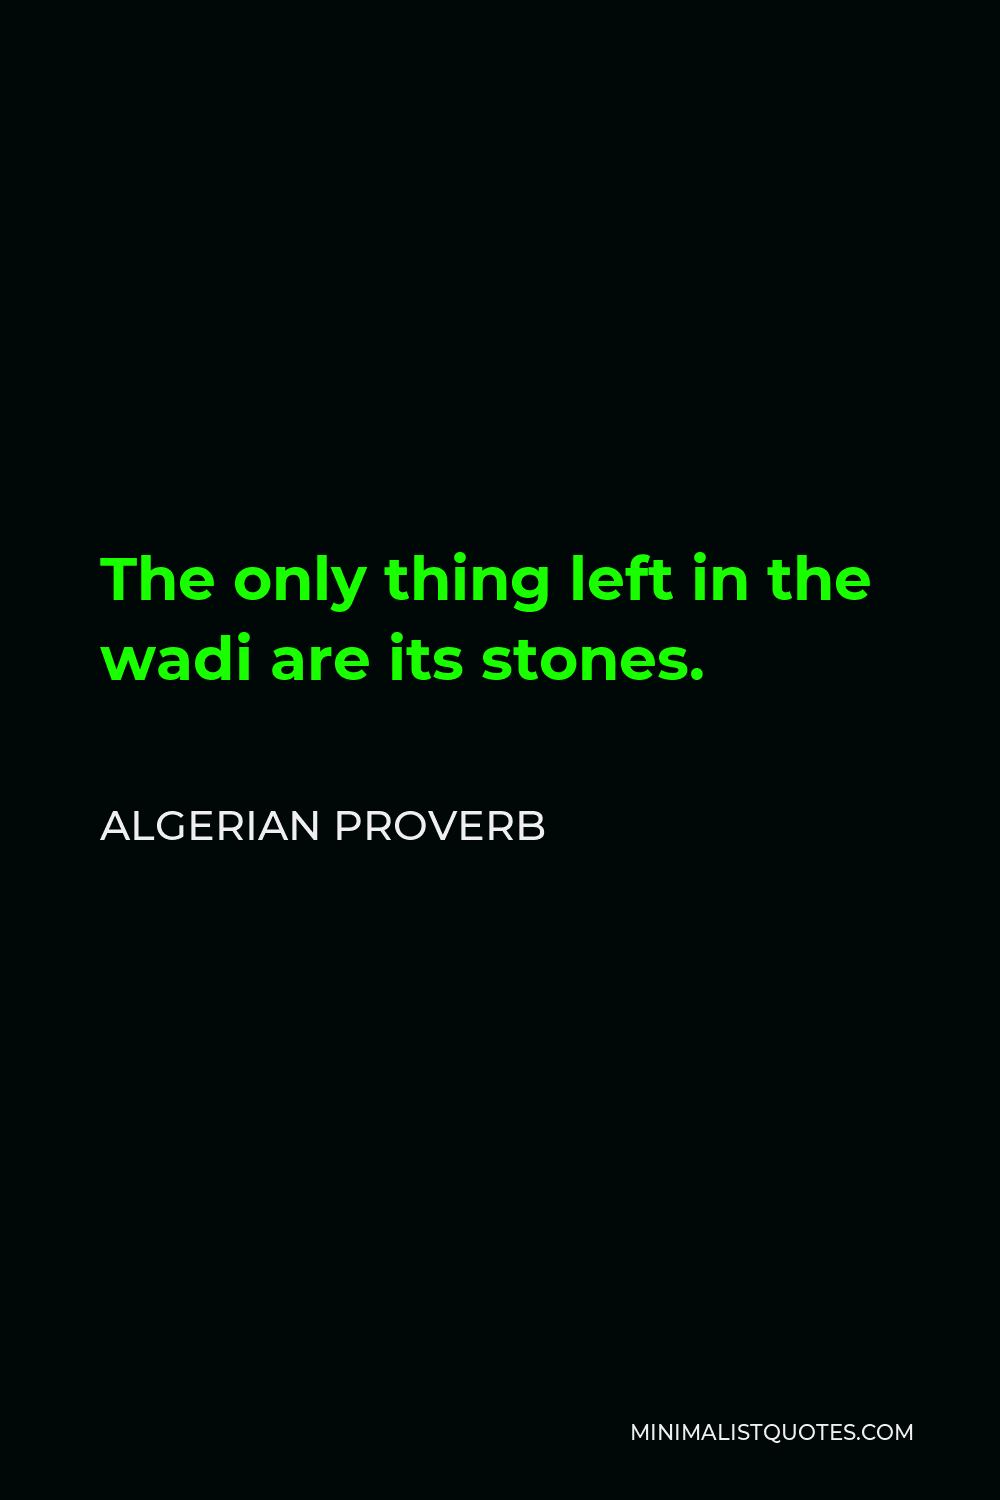 Algerian Proverb Quote - The only thing left in the wadi are its stones.